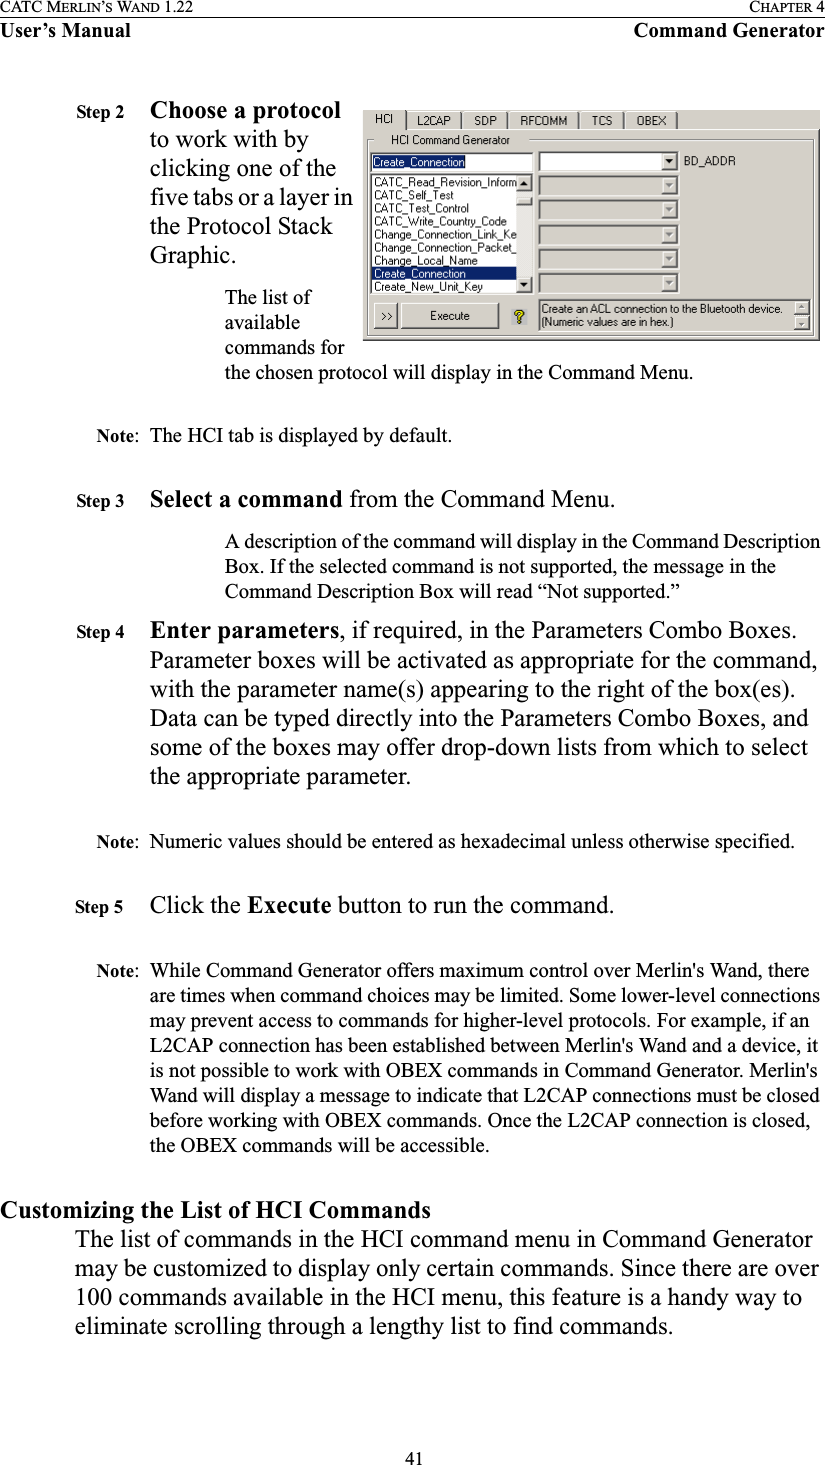  41CATC MERLIN’S WAND 1.22 CHAPTER 4User’s Manual Command GeneratorStep 2 Choose a protocol to work with by clicking one of the five tabs or a layer in the Protocol Stack Graphic.The list of available commands for the chosen protocol will display in the Command Menu. Note: The HCI tab is displayed by default.Step 3 Select a command from the Command Menu.A description of the command will display in the Command Description Box. If the selected command is not supported, the message in the Command Description Box will read “Not supported.”Step 4 Enter parameters, if required, in the Parameters Combo Boxes. Parameter boxes will be activated as appropriate for the command, with the parameter name(s) appearing to the right of the box(es). Data can be typed directly into the Parameters Combo Boxes, and some of the boxes may offer drop-down lists from which to select the appropriate parameter.Note: Numeric values should be entered as hexadecimal unless otherwise specified.Step 5 Click the Execute button to run the command.Note: While Command Generator offers maximum control over Merlin&apos;s Wand, there are times when command choices may be limited. Some lower-level connections may prevent access to commands for higher-level protocols. For example, if an L2CAP connection has been established between Merlin&apos;s Wand and a device, it is not possible to work with OBEX commands in Command Generator. Merlin&apos;s Wand will display a message to indicate that L2CAP connections must be closed before working with OBEX commands. Once the L2CAP connection is closed, the OBEX commands will be accessible.Customizing the List of HCI CommandsThe list of commands in the HCI command menu in Command Generator may be customized to display only certain commands. Since there are over 100 commands available in the HCI menu, this feature is a handy way to eliminate scrolling through a lengthy list to find commands.